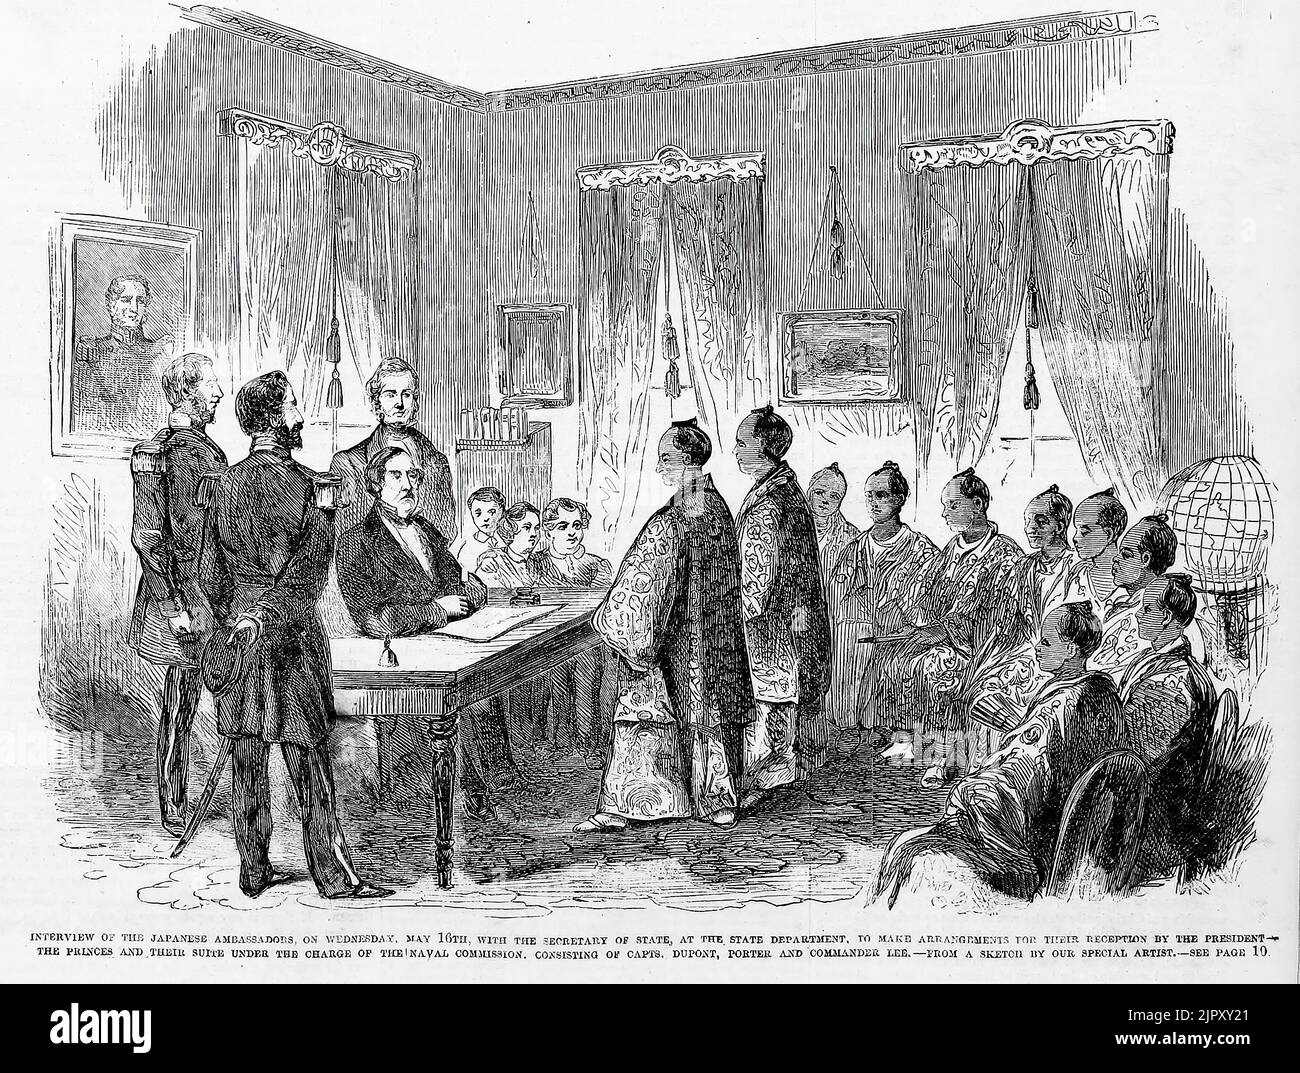 Interview of the Japanese ambassadors, May 16th, 1860, with the Secretary of State, at the State Department, to make arrangements for their reception by the President - The Princes and their suite under the charge of the Naval Commission, consisting of Captains Samuel F. DuPont, David D. Porter and Commander Sidney Smith Lee. Japanese Embassy to the United States. 19th century illustration from Frank Leslie's Illustrated Newspaper Stock Photo